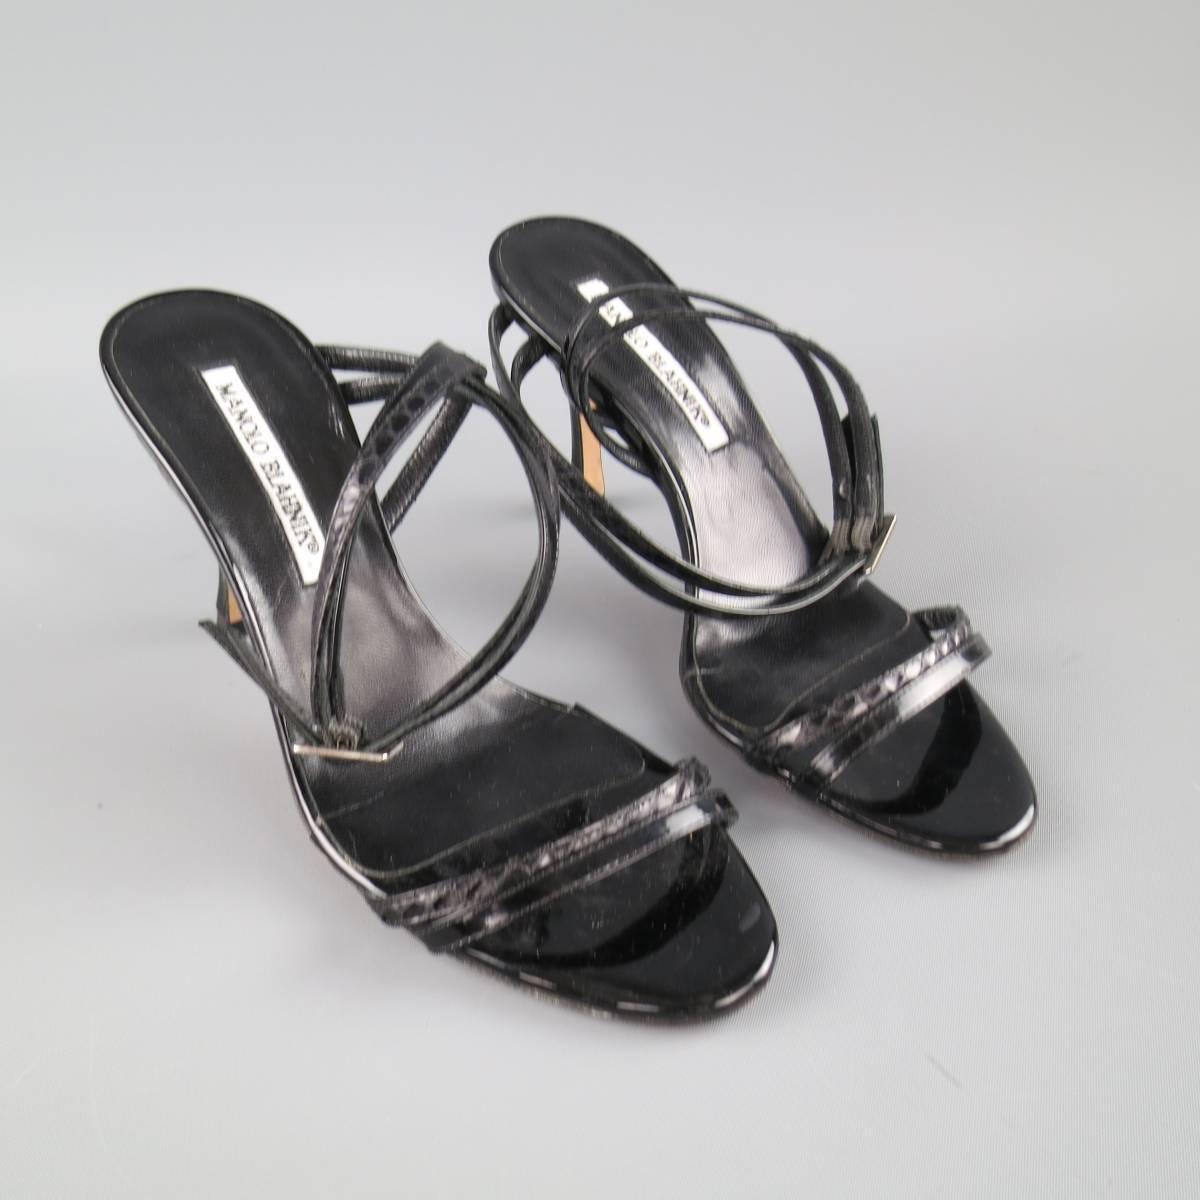 MANOLO BLAHNIK sandals come in a high gloss black patent leather with snake skin details and feature a double skinny toe strap, covered stiletto heel, and asymmetrical wrapped ankle straps. Made in Italy.
 
Good Pre-Owned Condition.
Marked:IT 36.5
